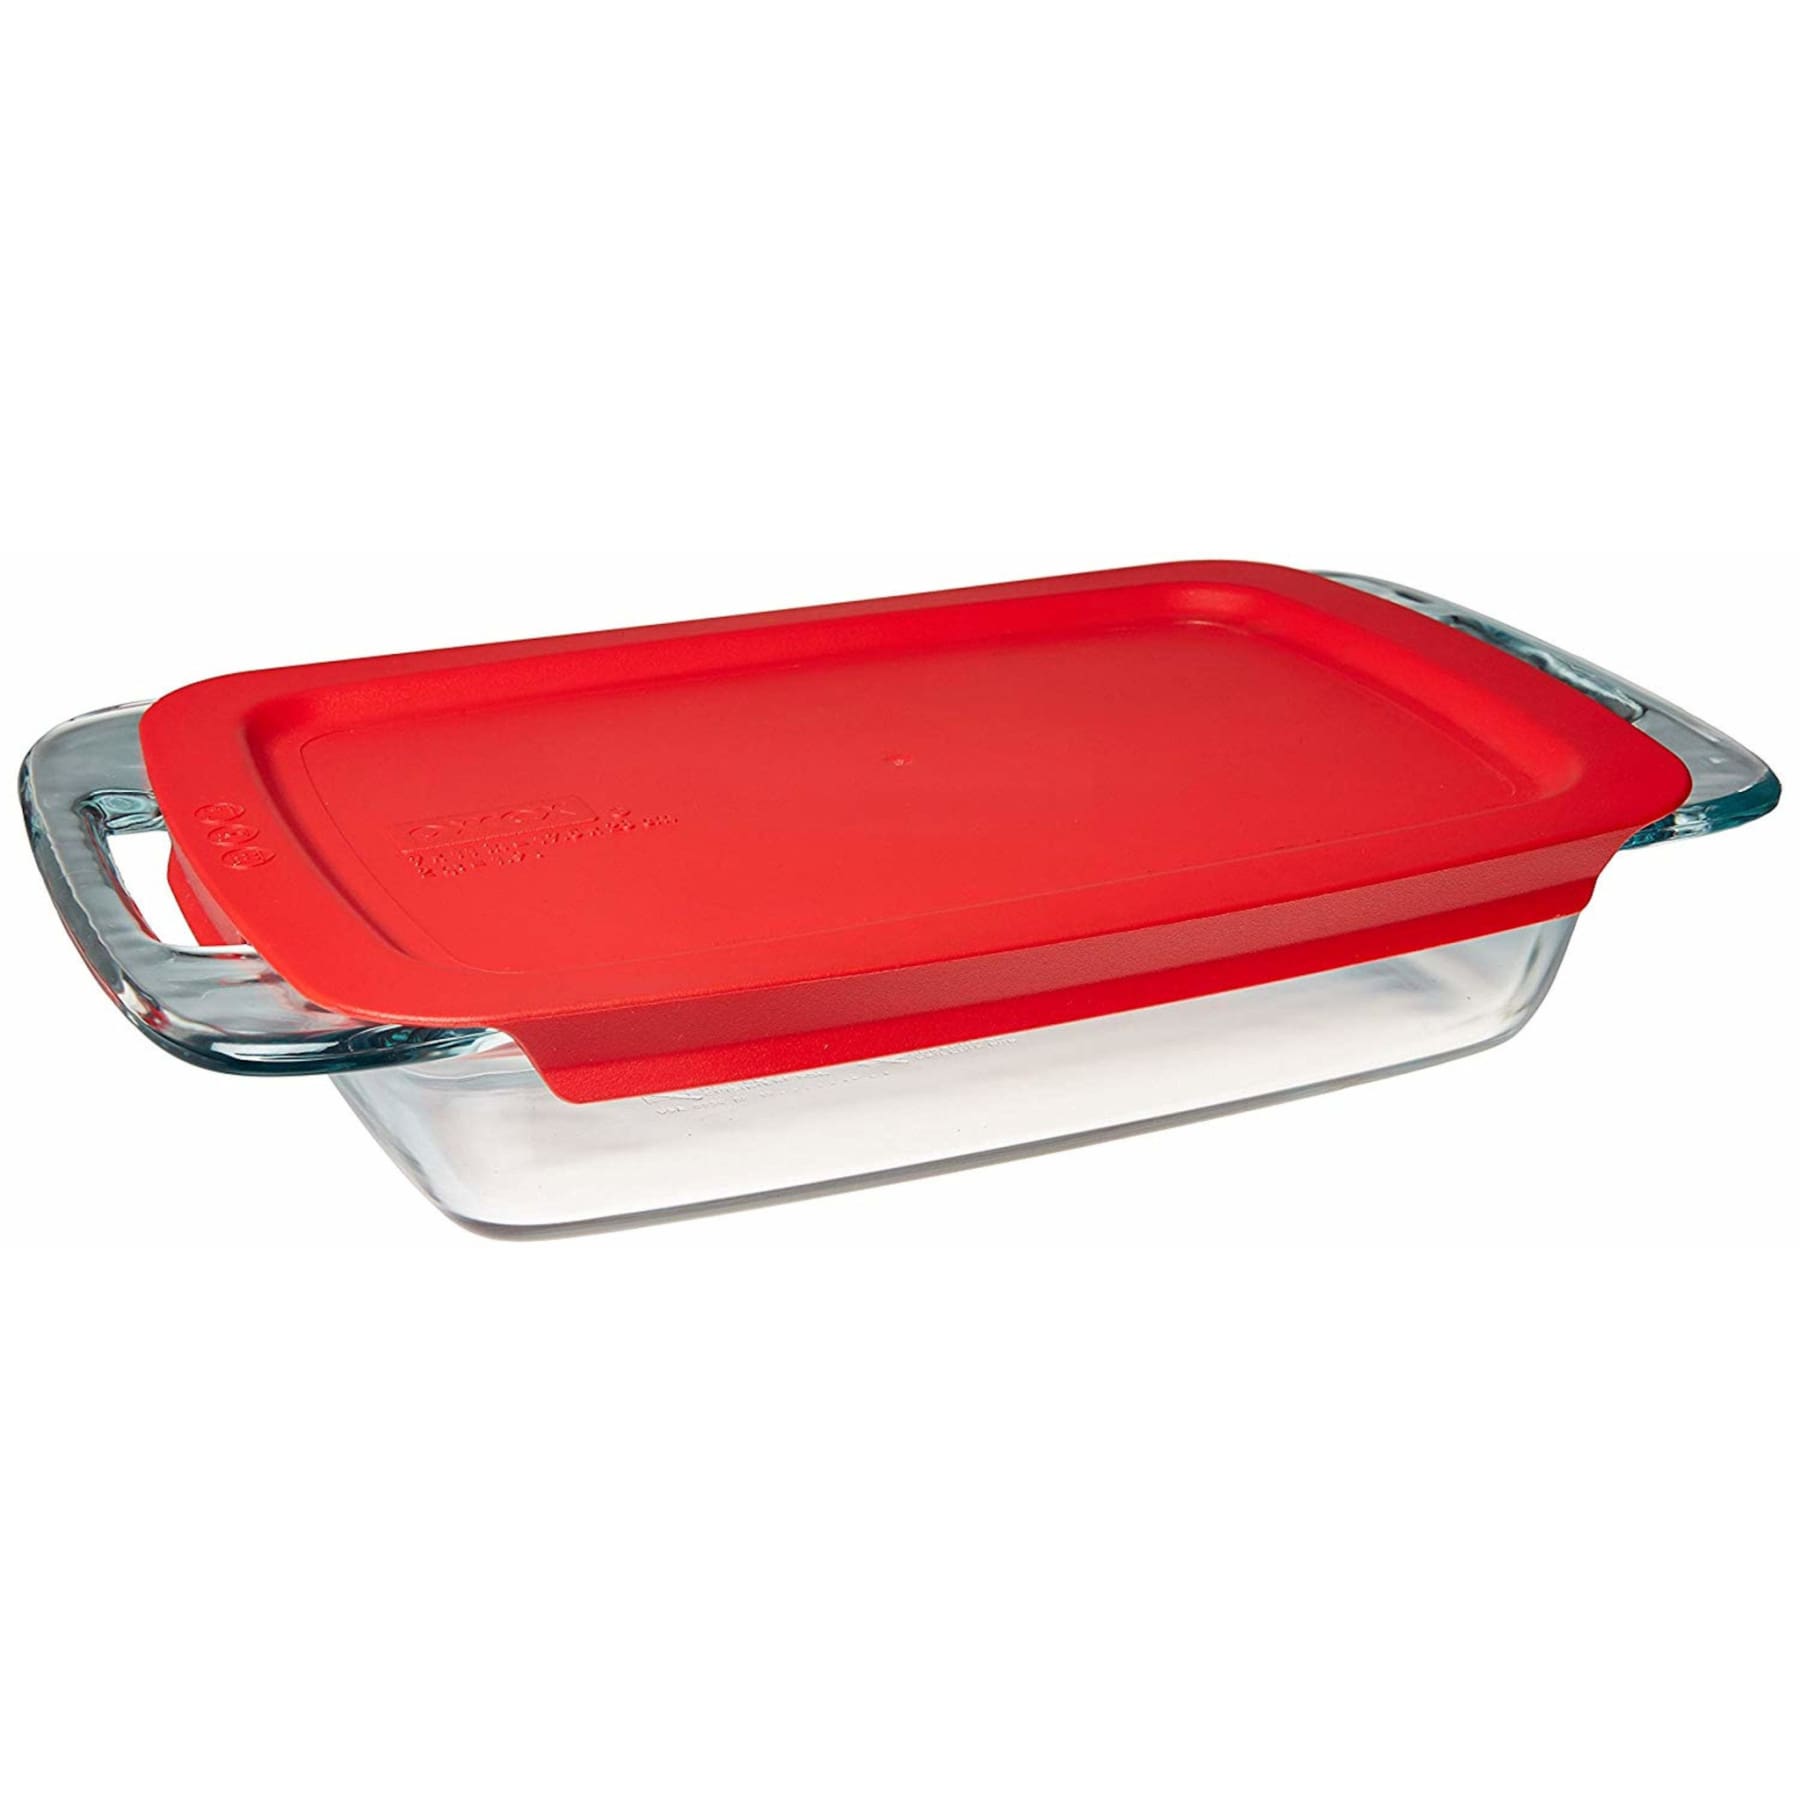 Custom Personalized Casserole Dish Pyrex Baking Dish With Lid 